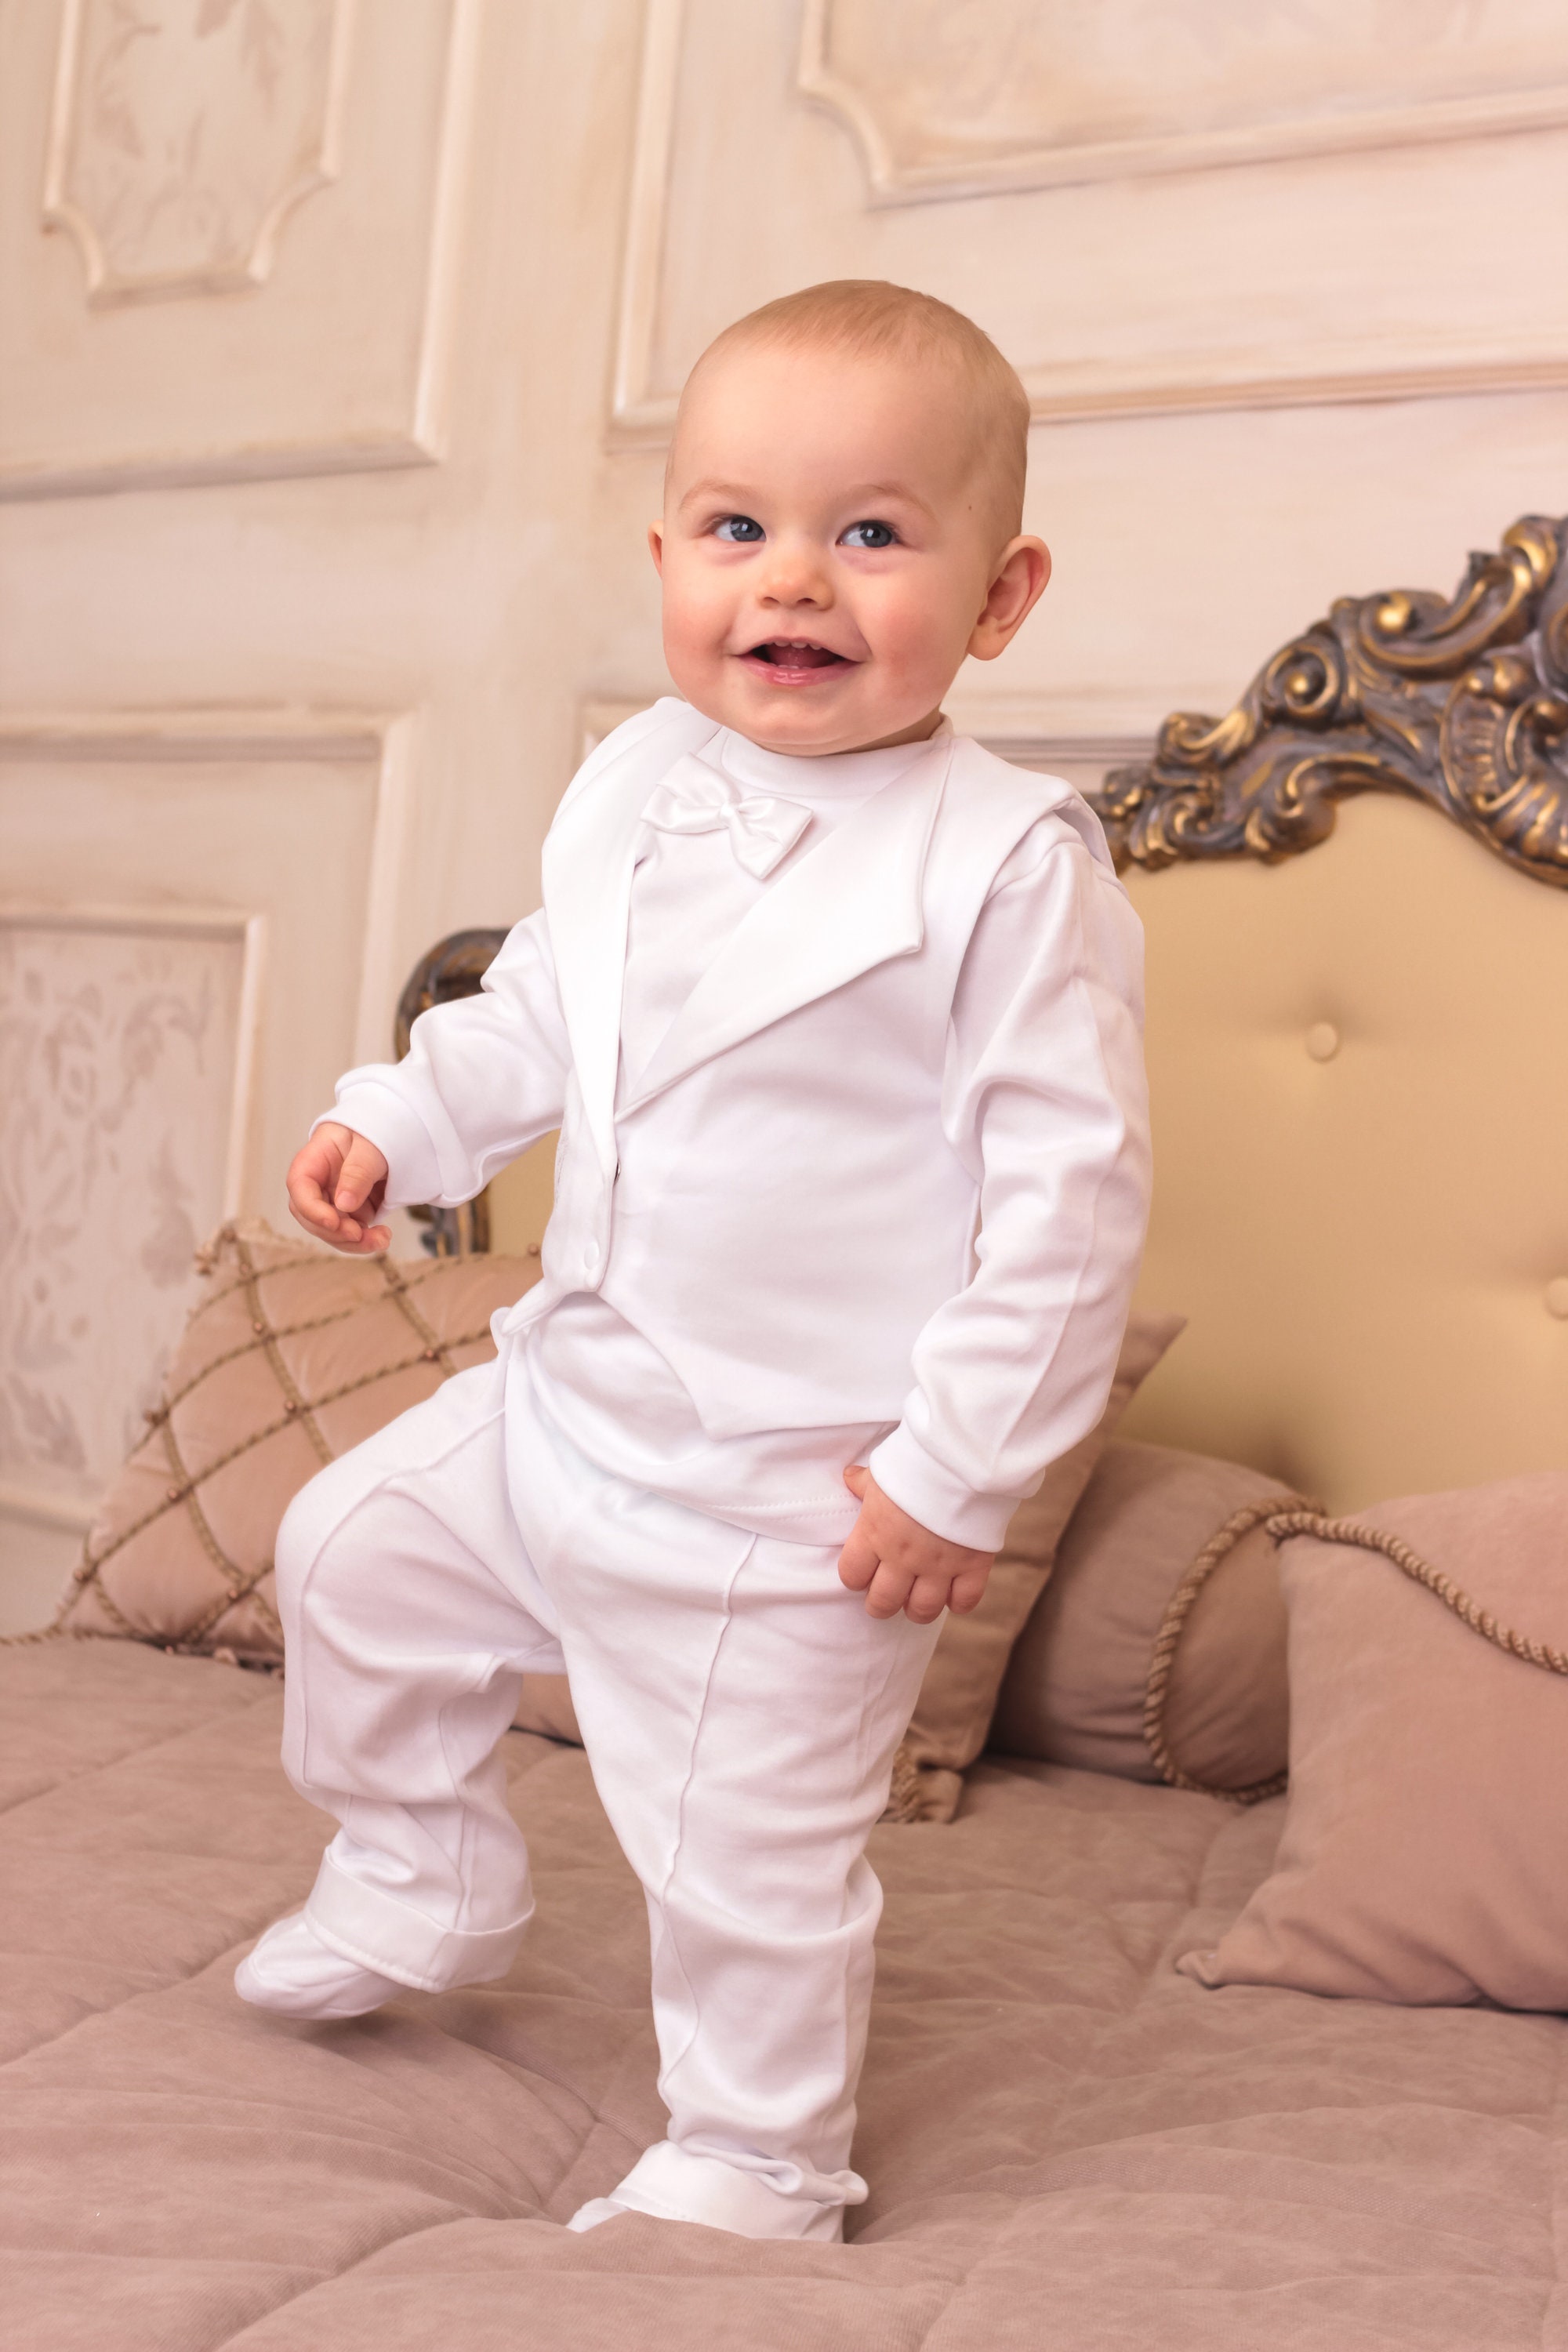 Christening & Baptism Outfits Boy Imperfect Baby Boy Christening Jumpsuit 'Harrison' White Cotton Jumpsuit Clothing Unisex Kids Clothing Footies & Rompers FINAL SALE Boys Outfits 